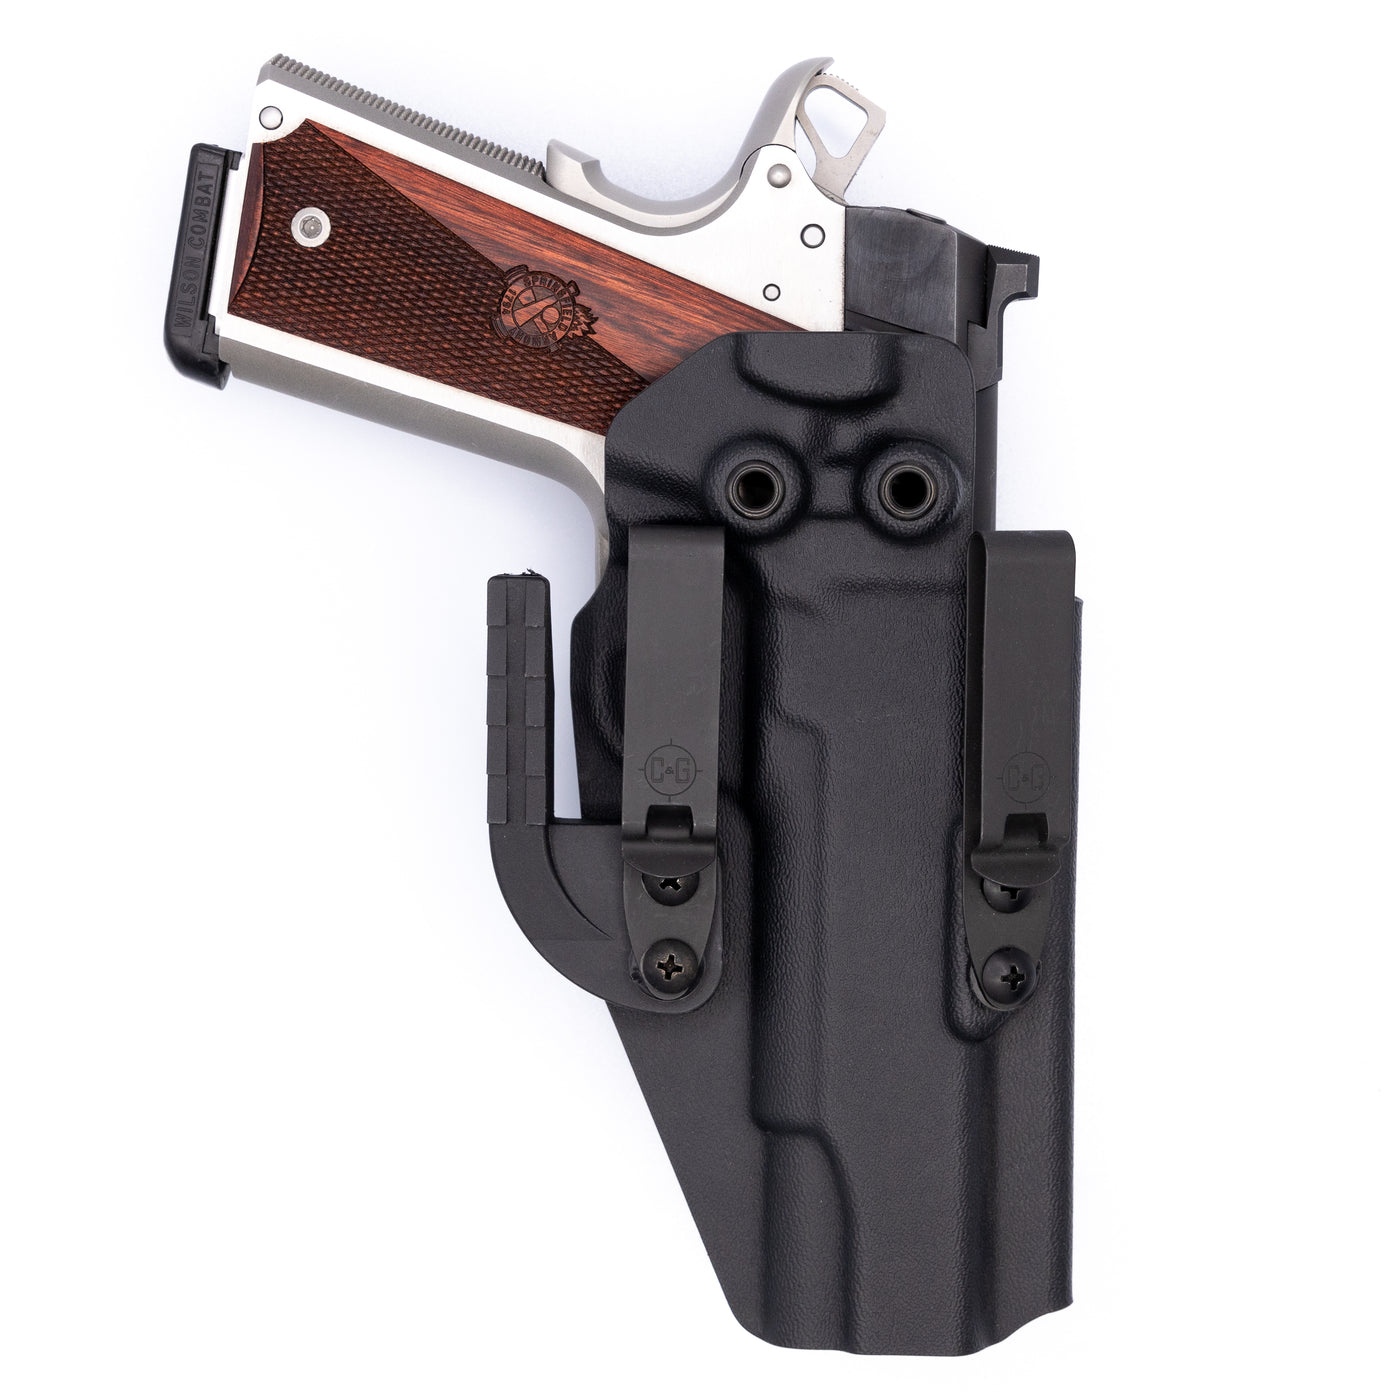 Shown is a custom C&G Holsters IWB Alpha inside the waistband Holster for the Springfield Ronin 1911.